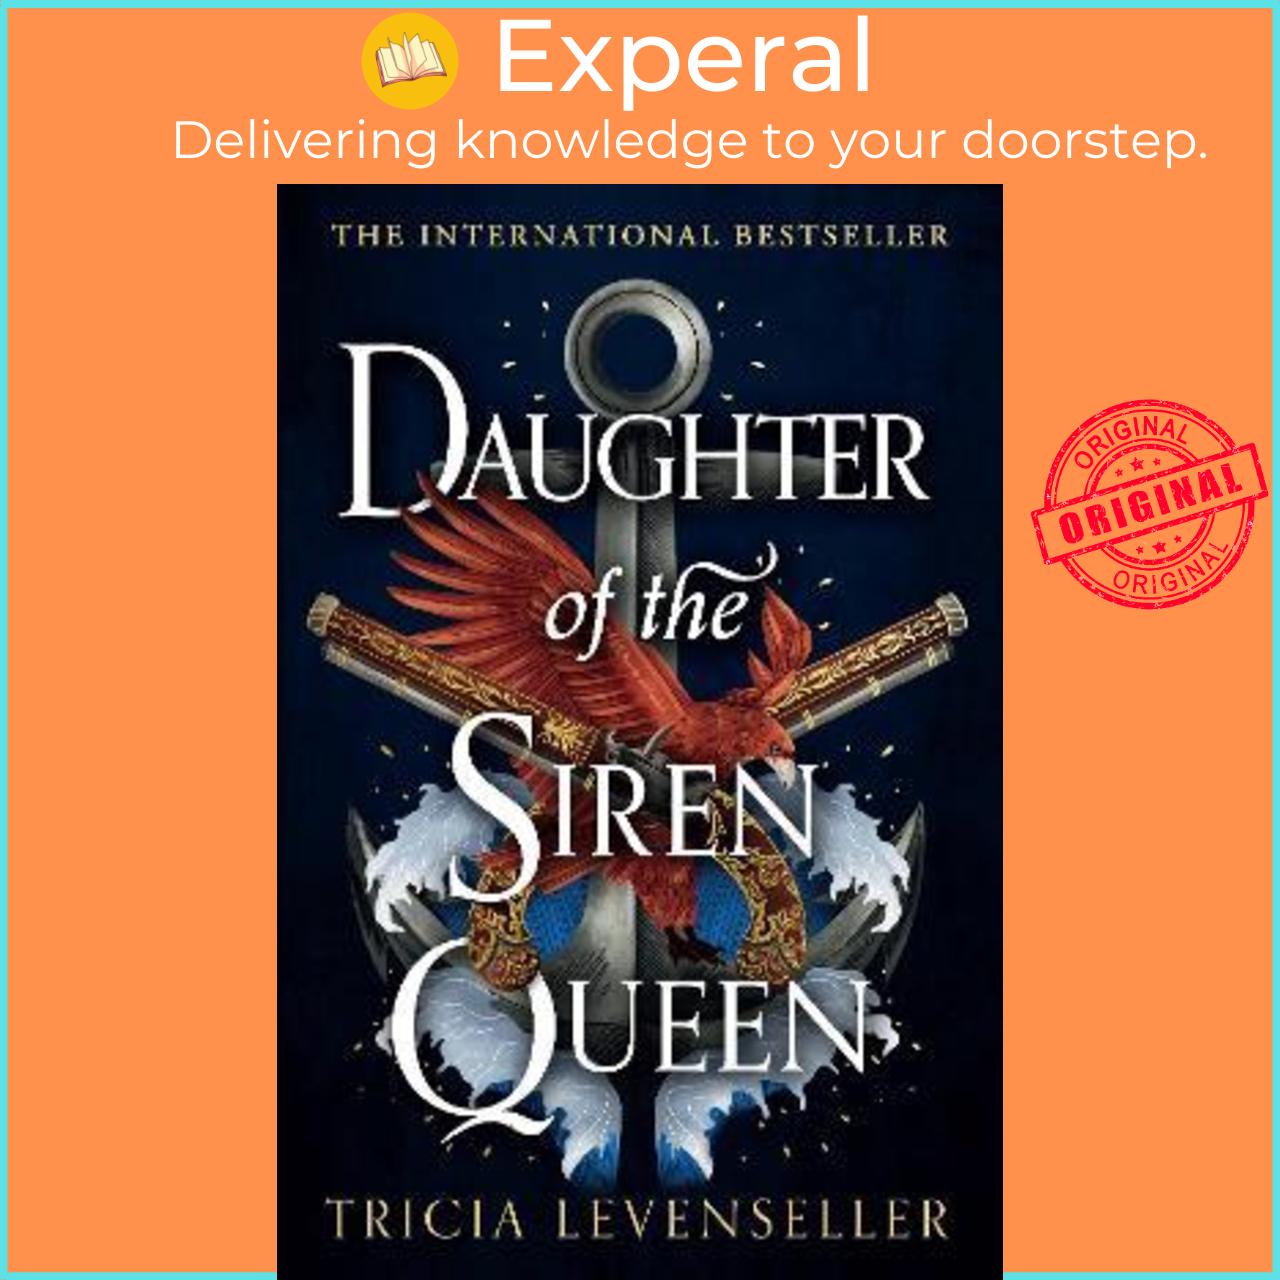 Sách - Daughter of the Siren Queen by Tricia Levenseller (UK edition, paperback)